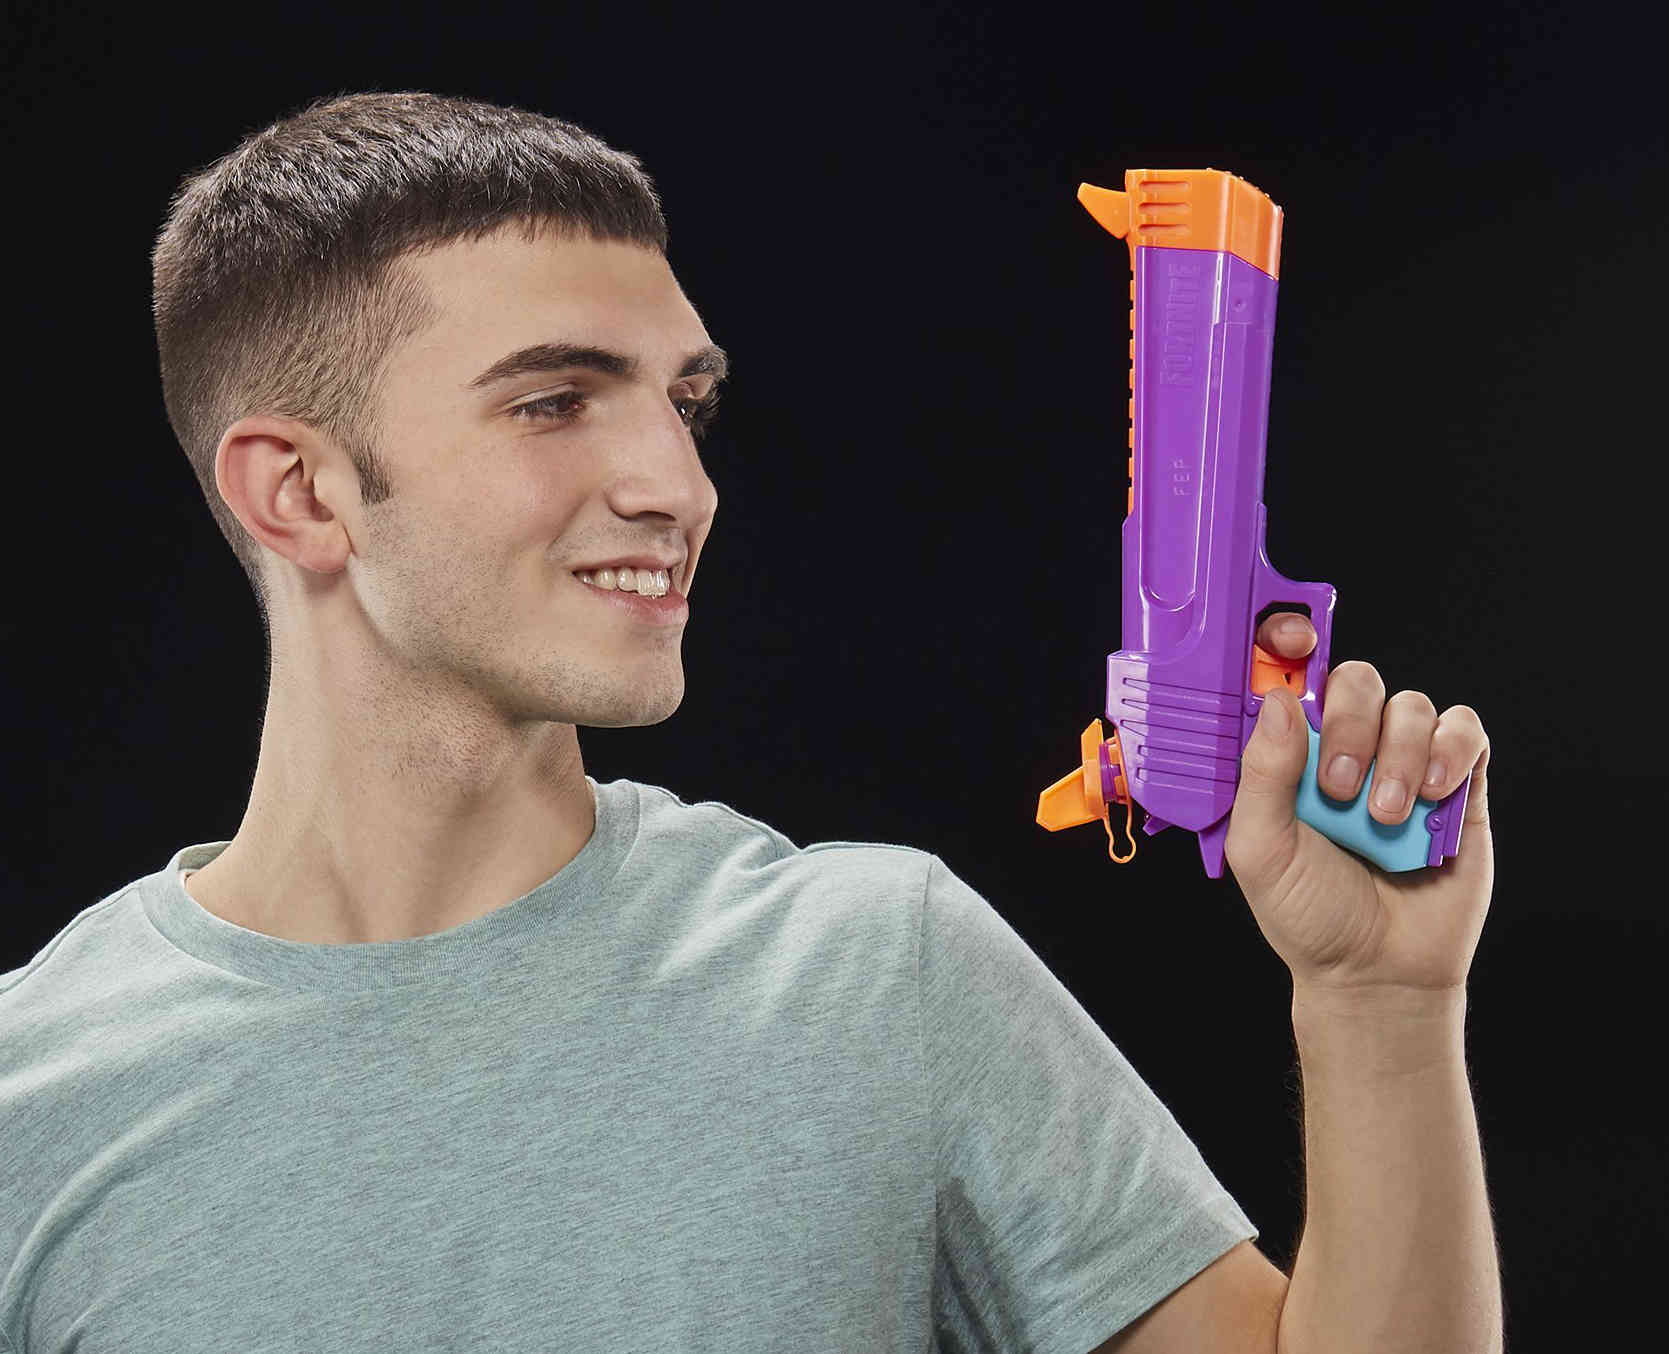 hasbro s lineup includes small cheap products like a 9 99 usd ts nerf microshots dart gun including a version that looks like a llama head - nerf microshots fortnite